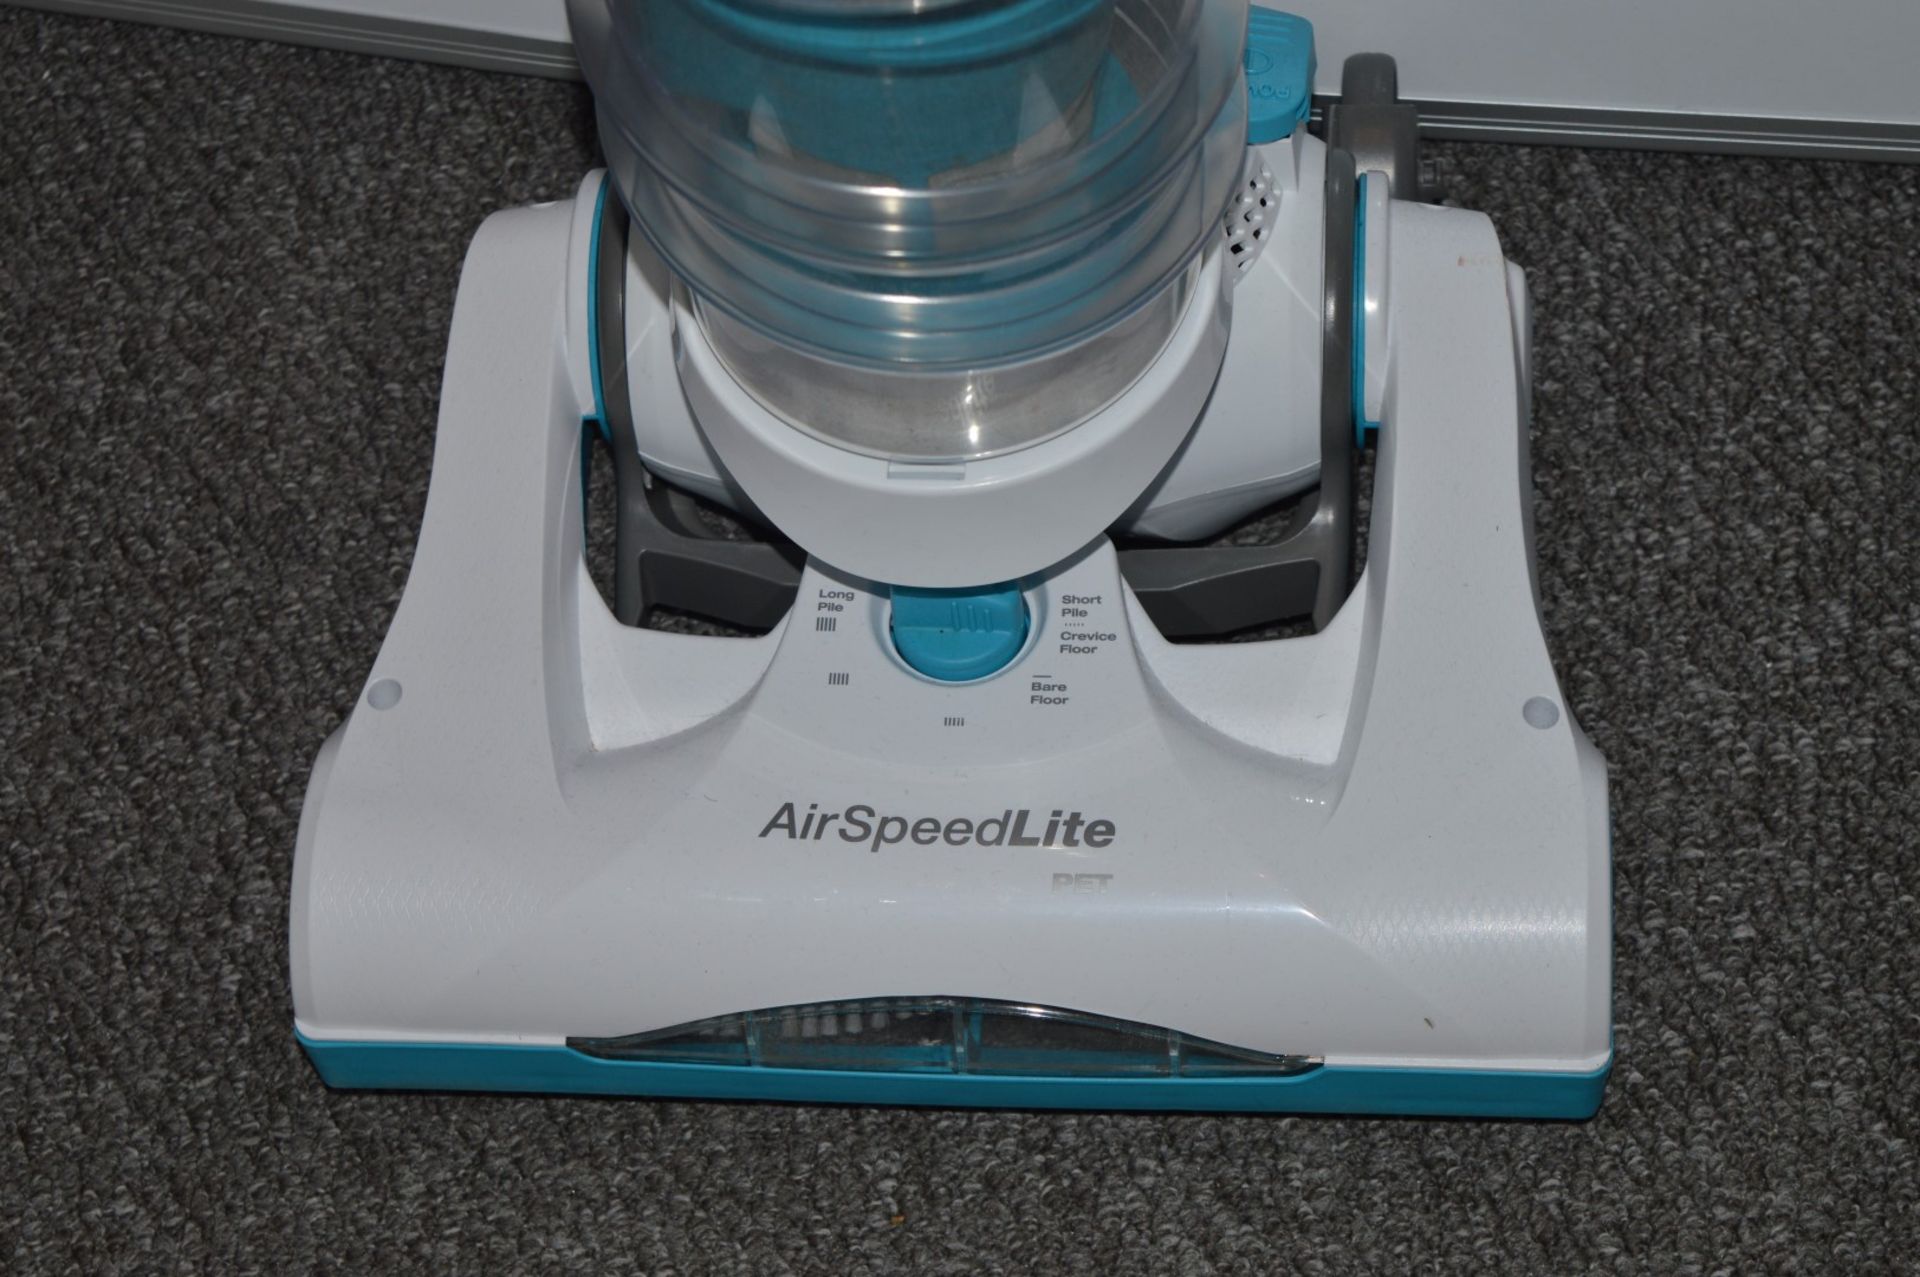 1 x Zanussi Airspeed Lite Pet Vacuum Cleaner - Includes All Accessories - Good Condition With Only - Image 4 of 6